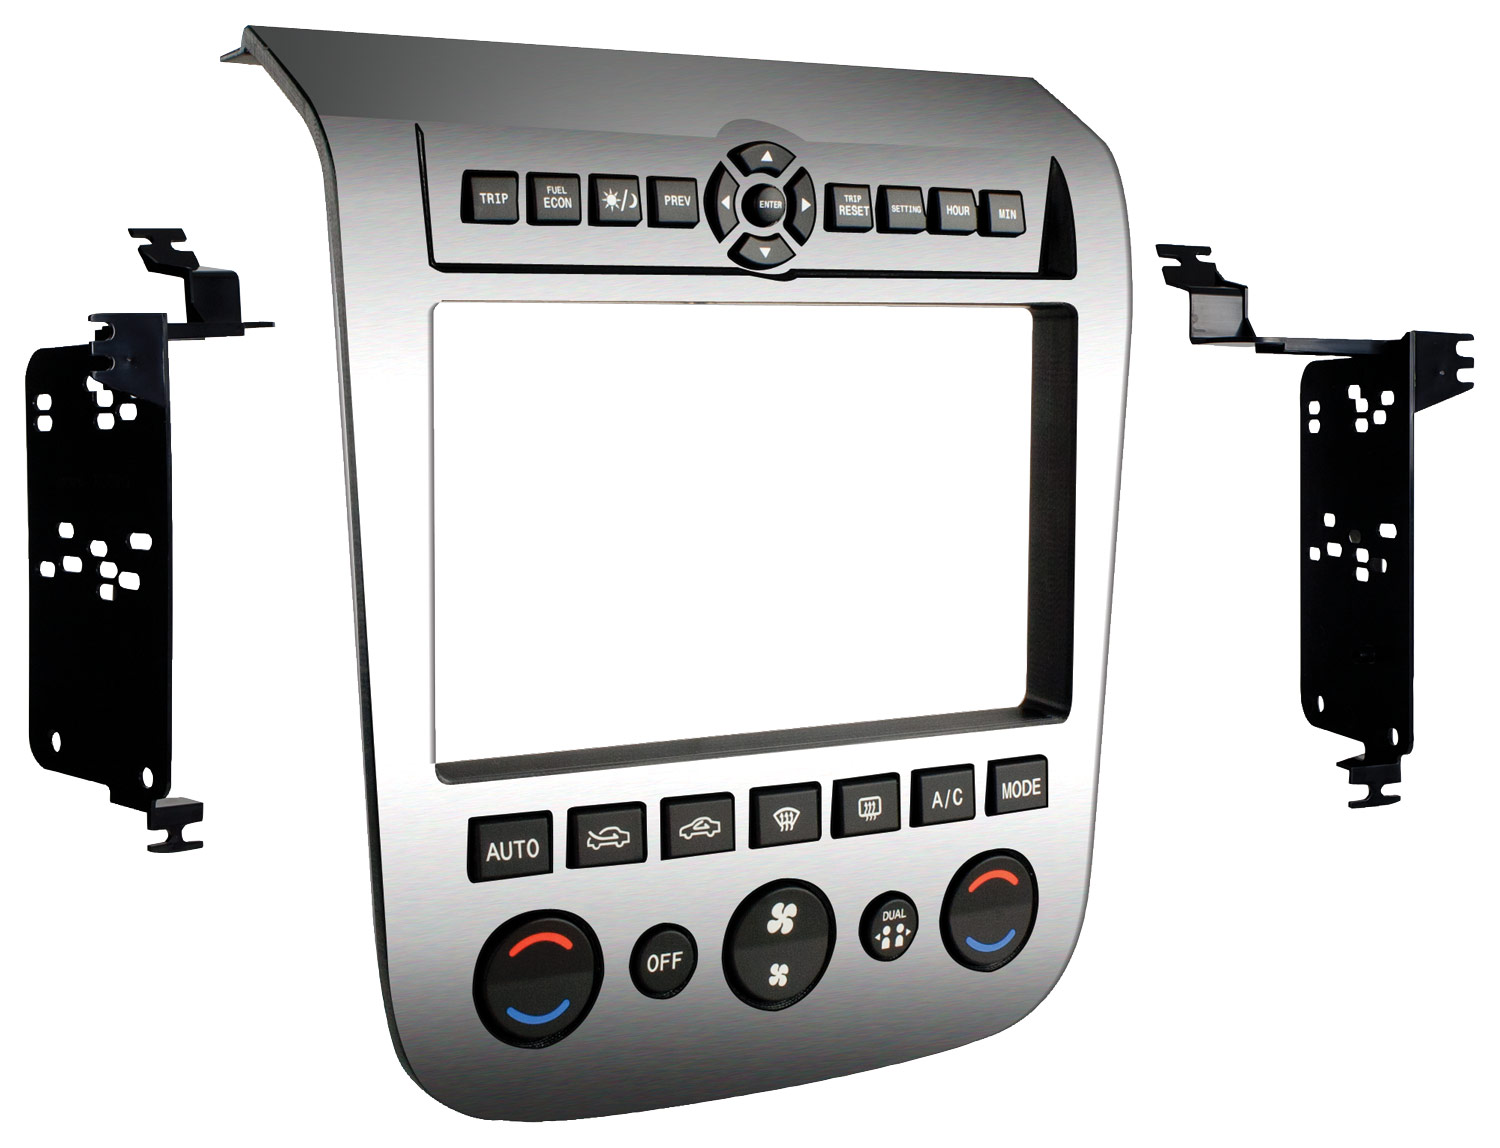 Metra - Dash Kit for Select 2003-2007 Nissan Murano with brushed aluminum dash - Aluminum was $299.99 now $224.99 (25.0% off)